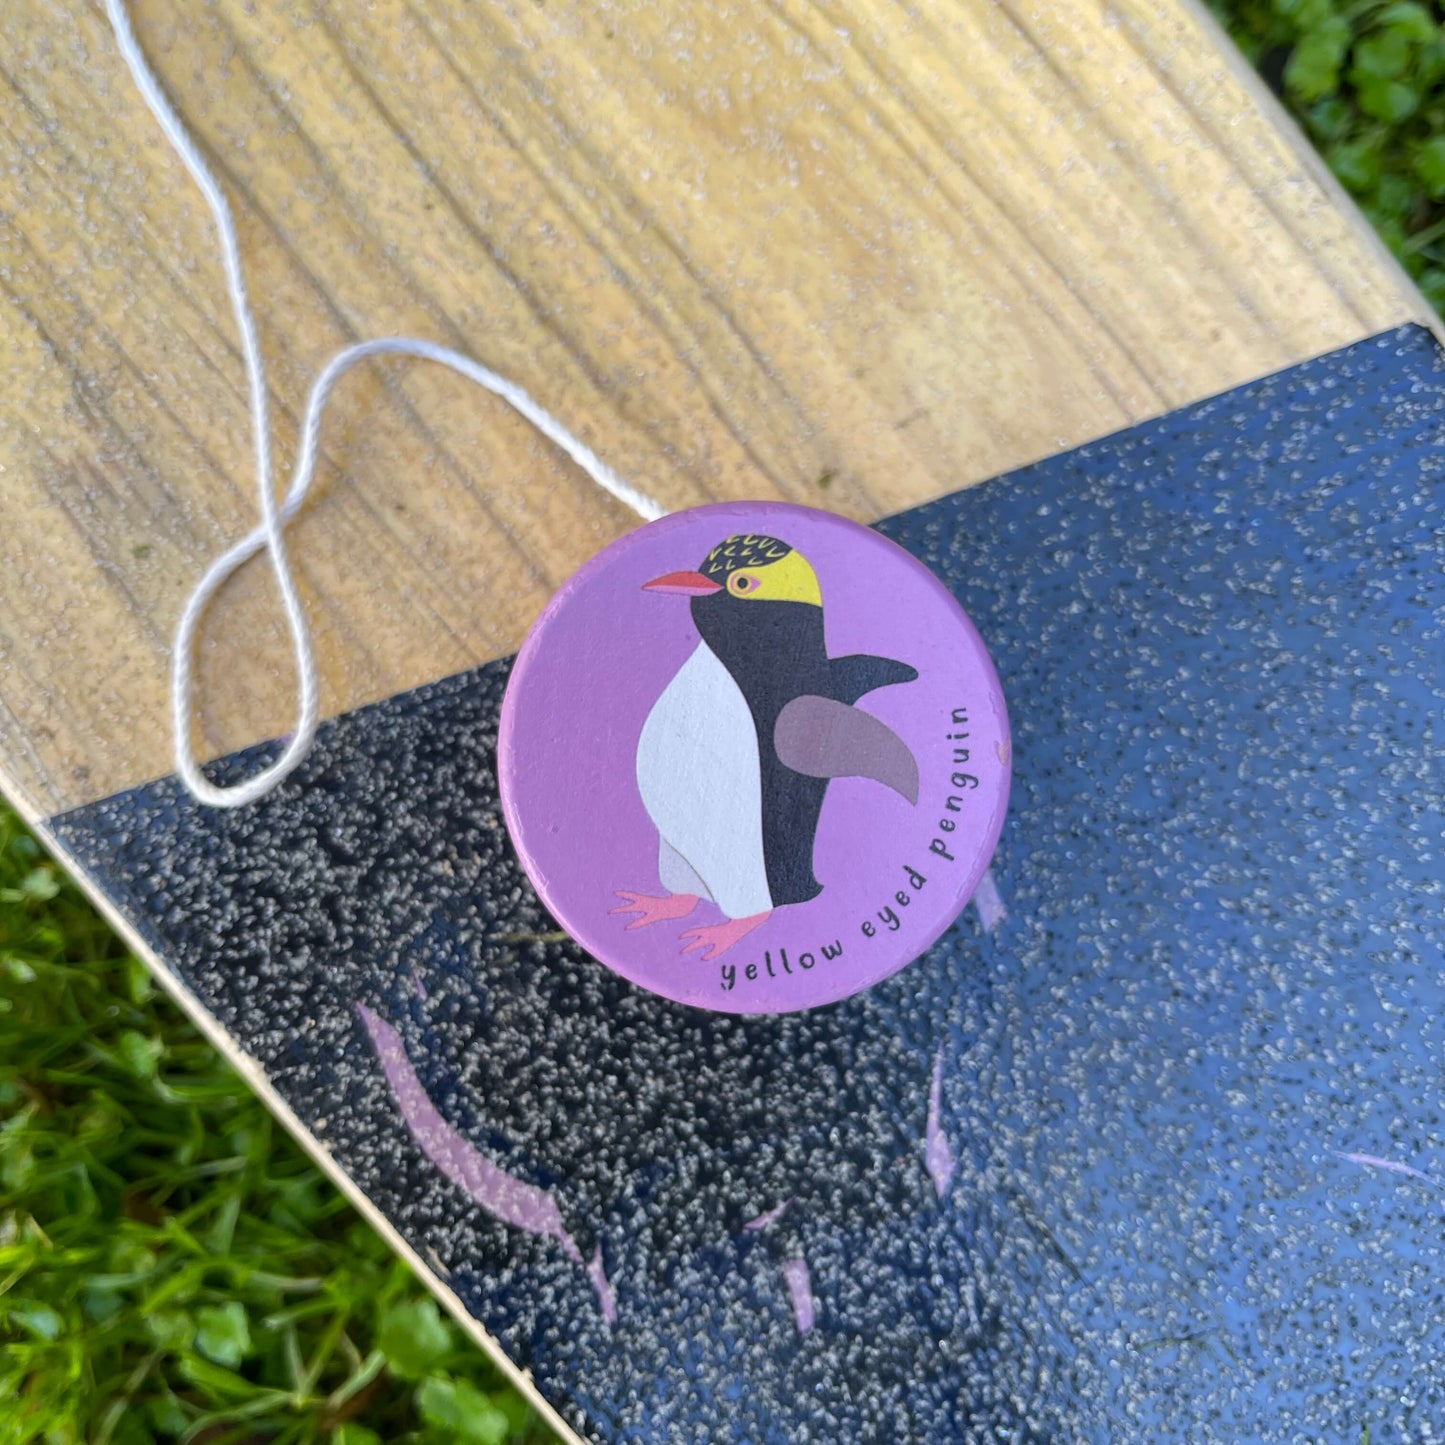 Purple wooden yoyo with a Yellow Eyed Penguin painted on it sitting on a skateboard.